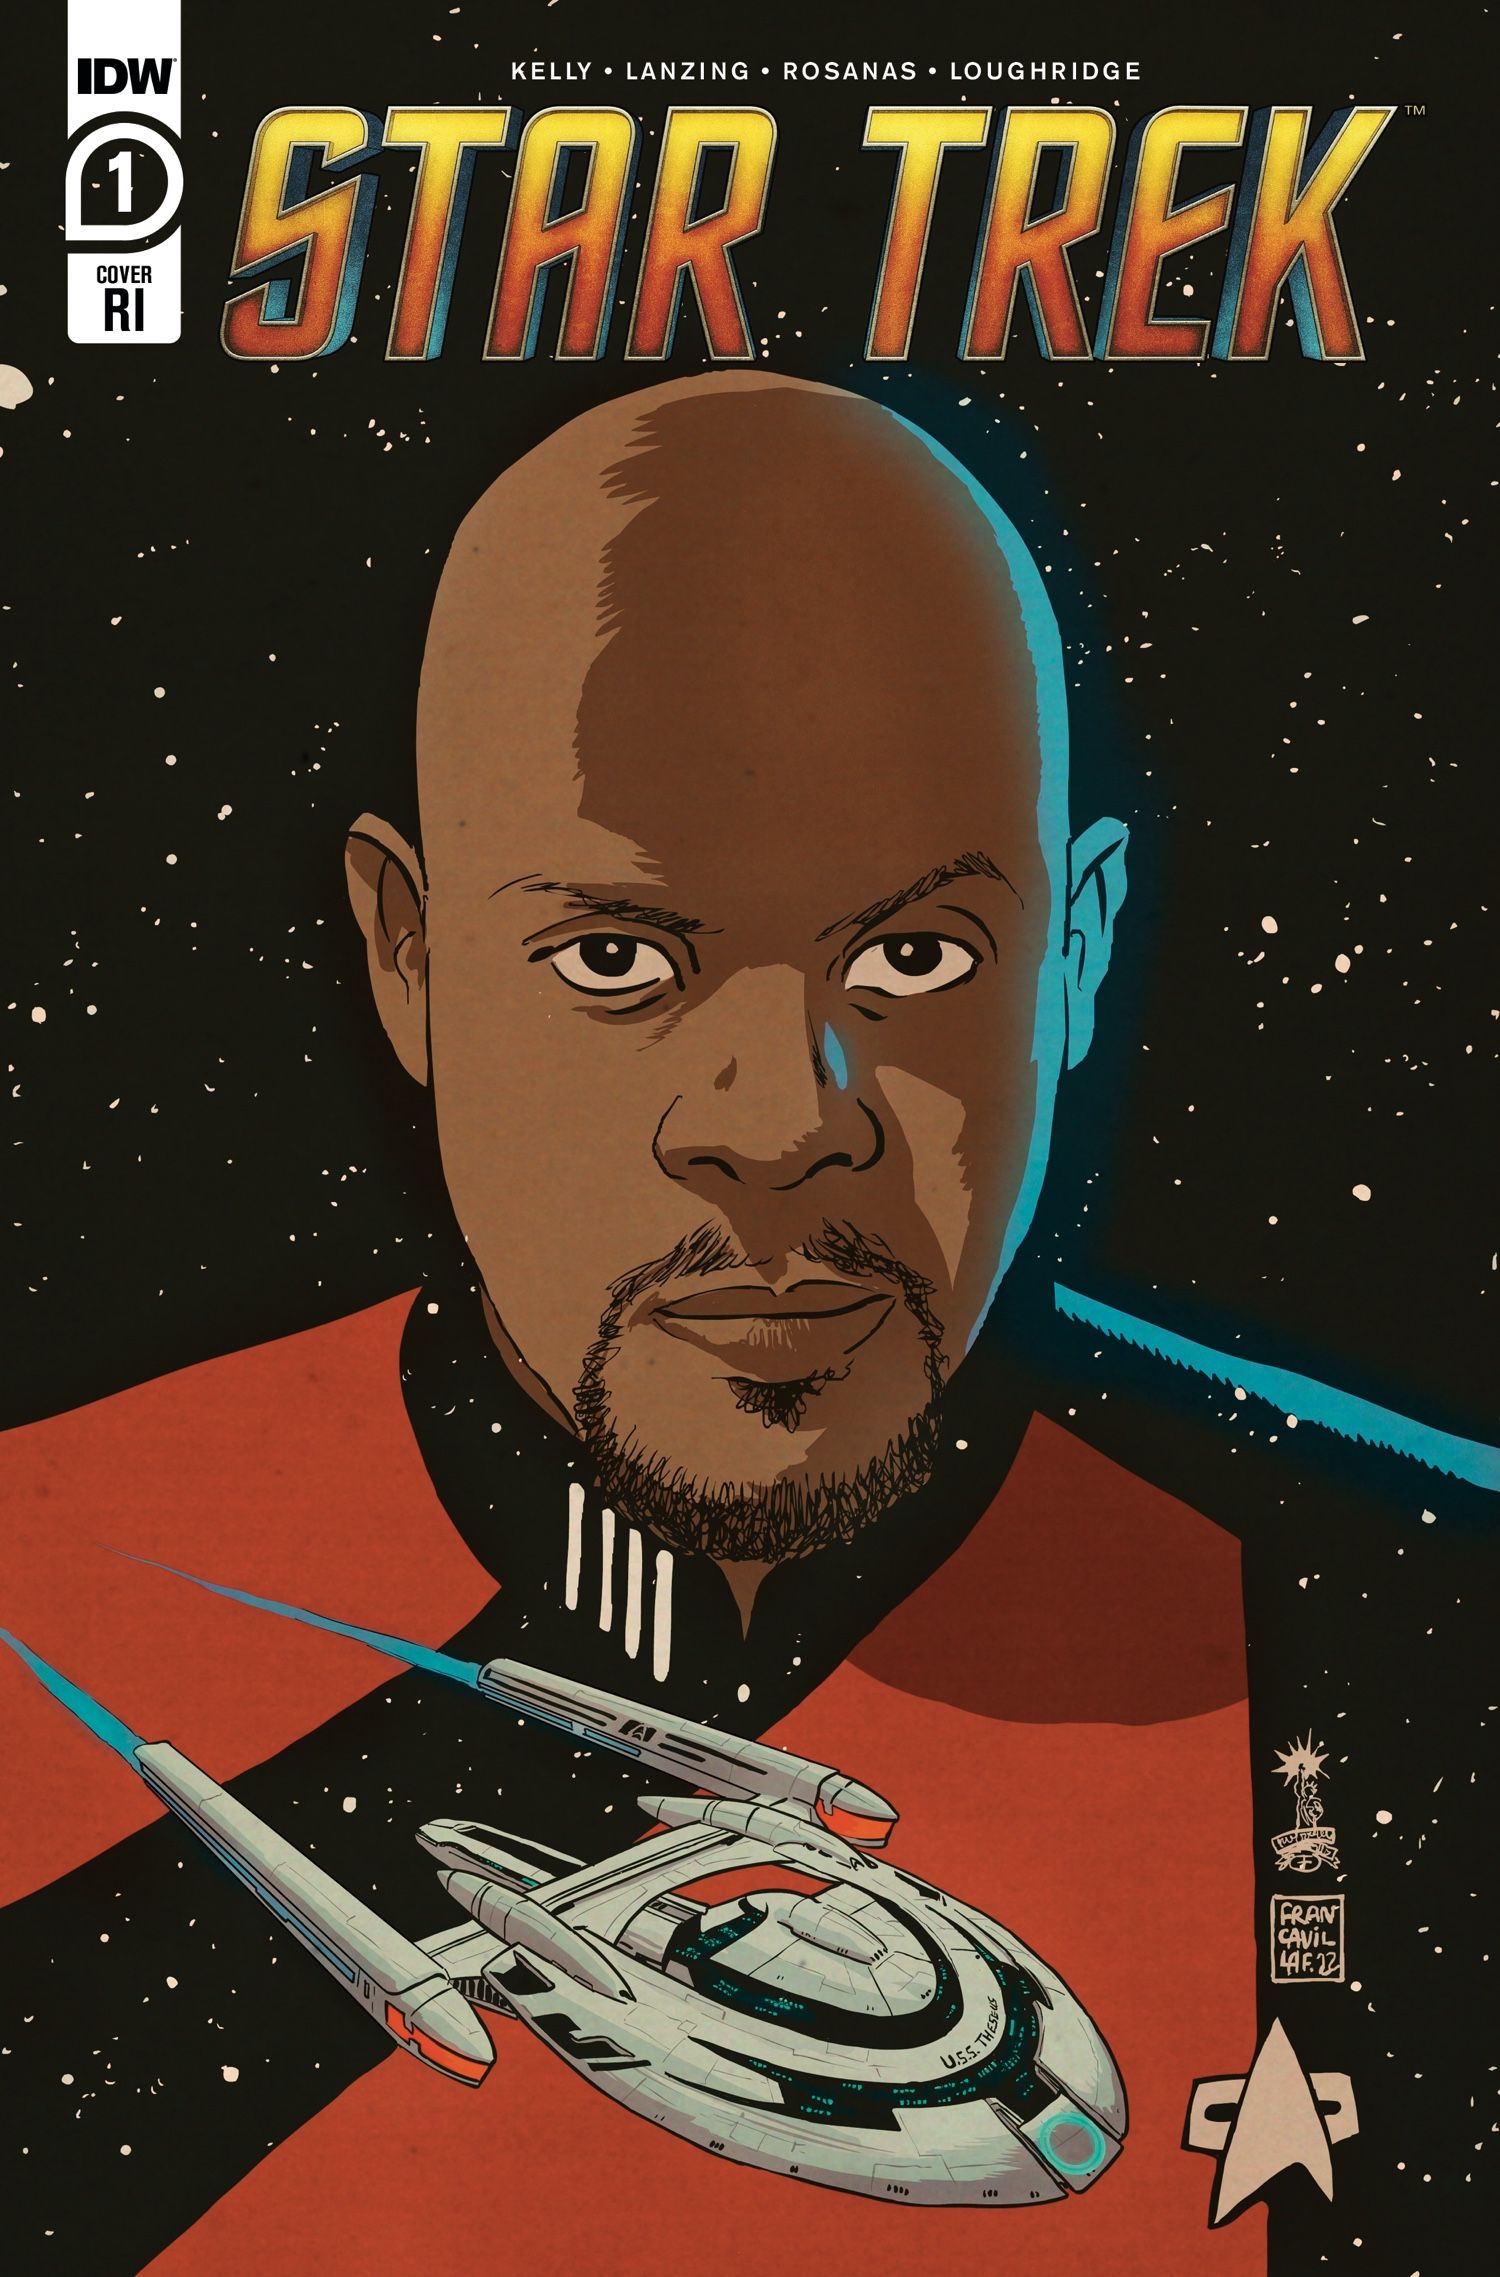 IDW Launches New Era of Star Trek Comic Books With the Debut of Star Trek #1